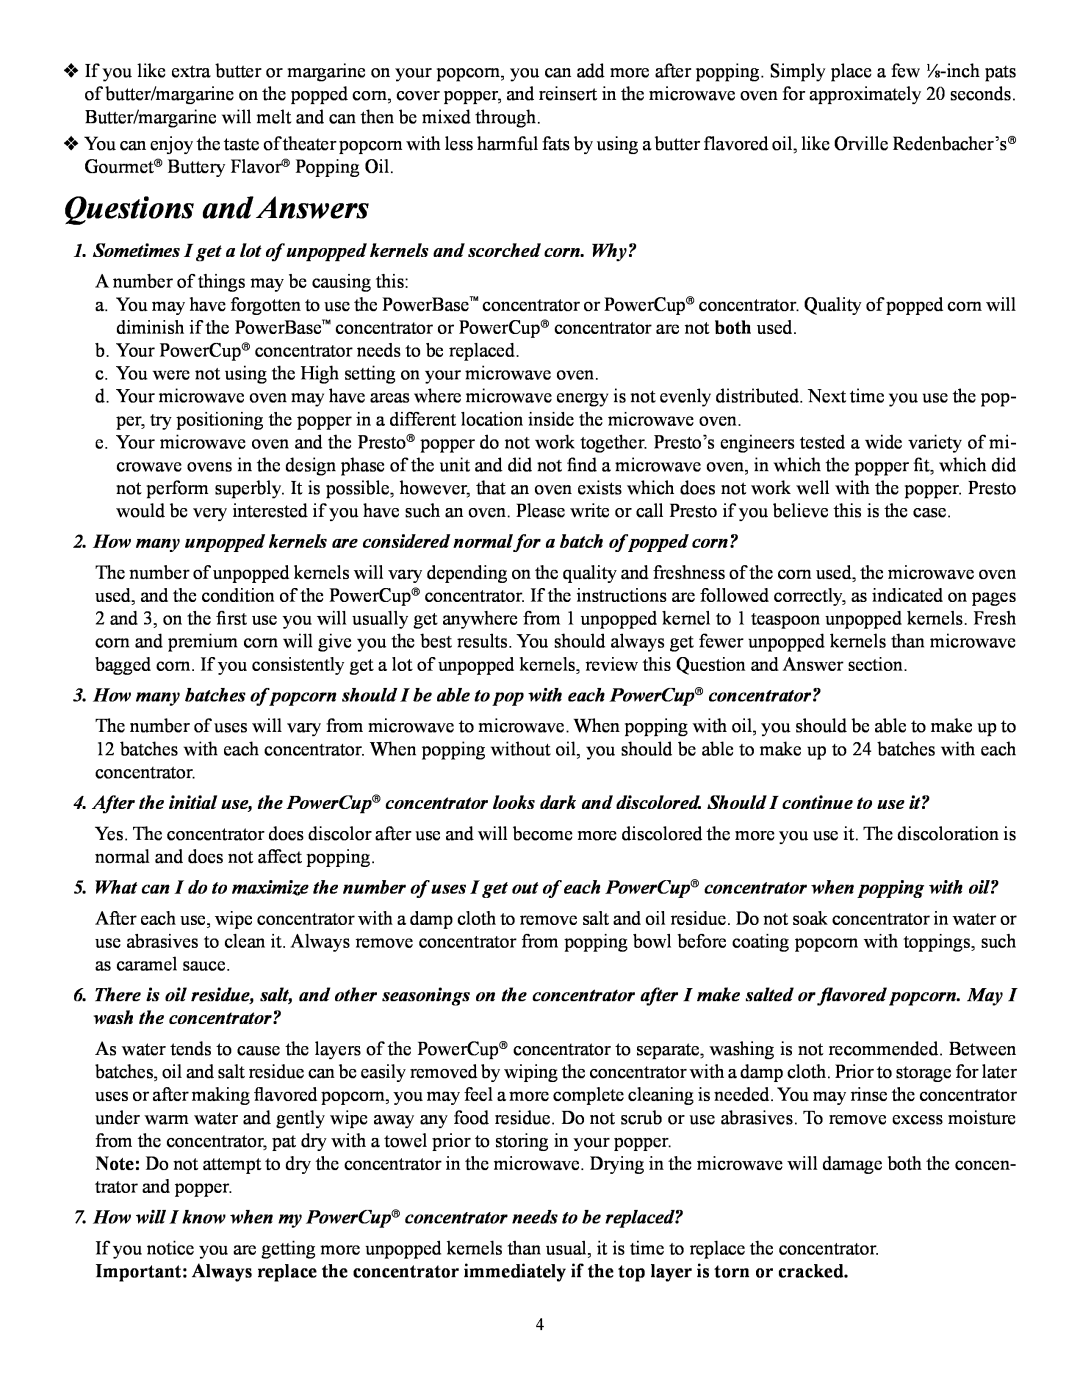 Presto 4830 manual Questions and Answers 